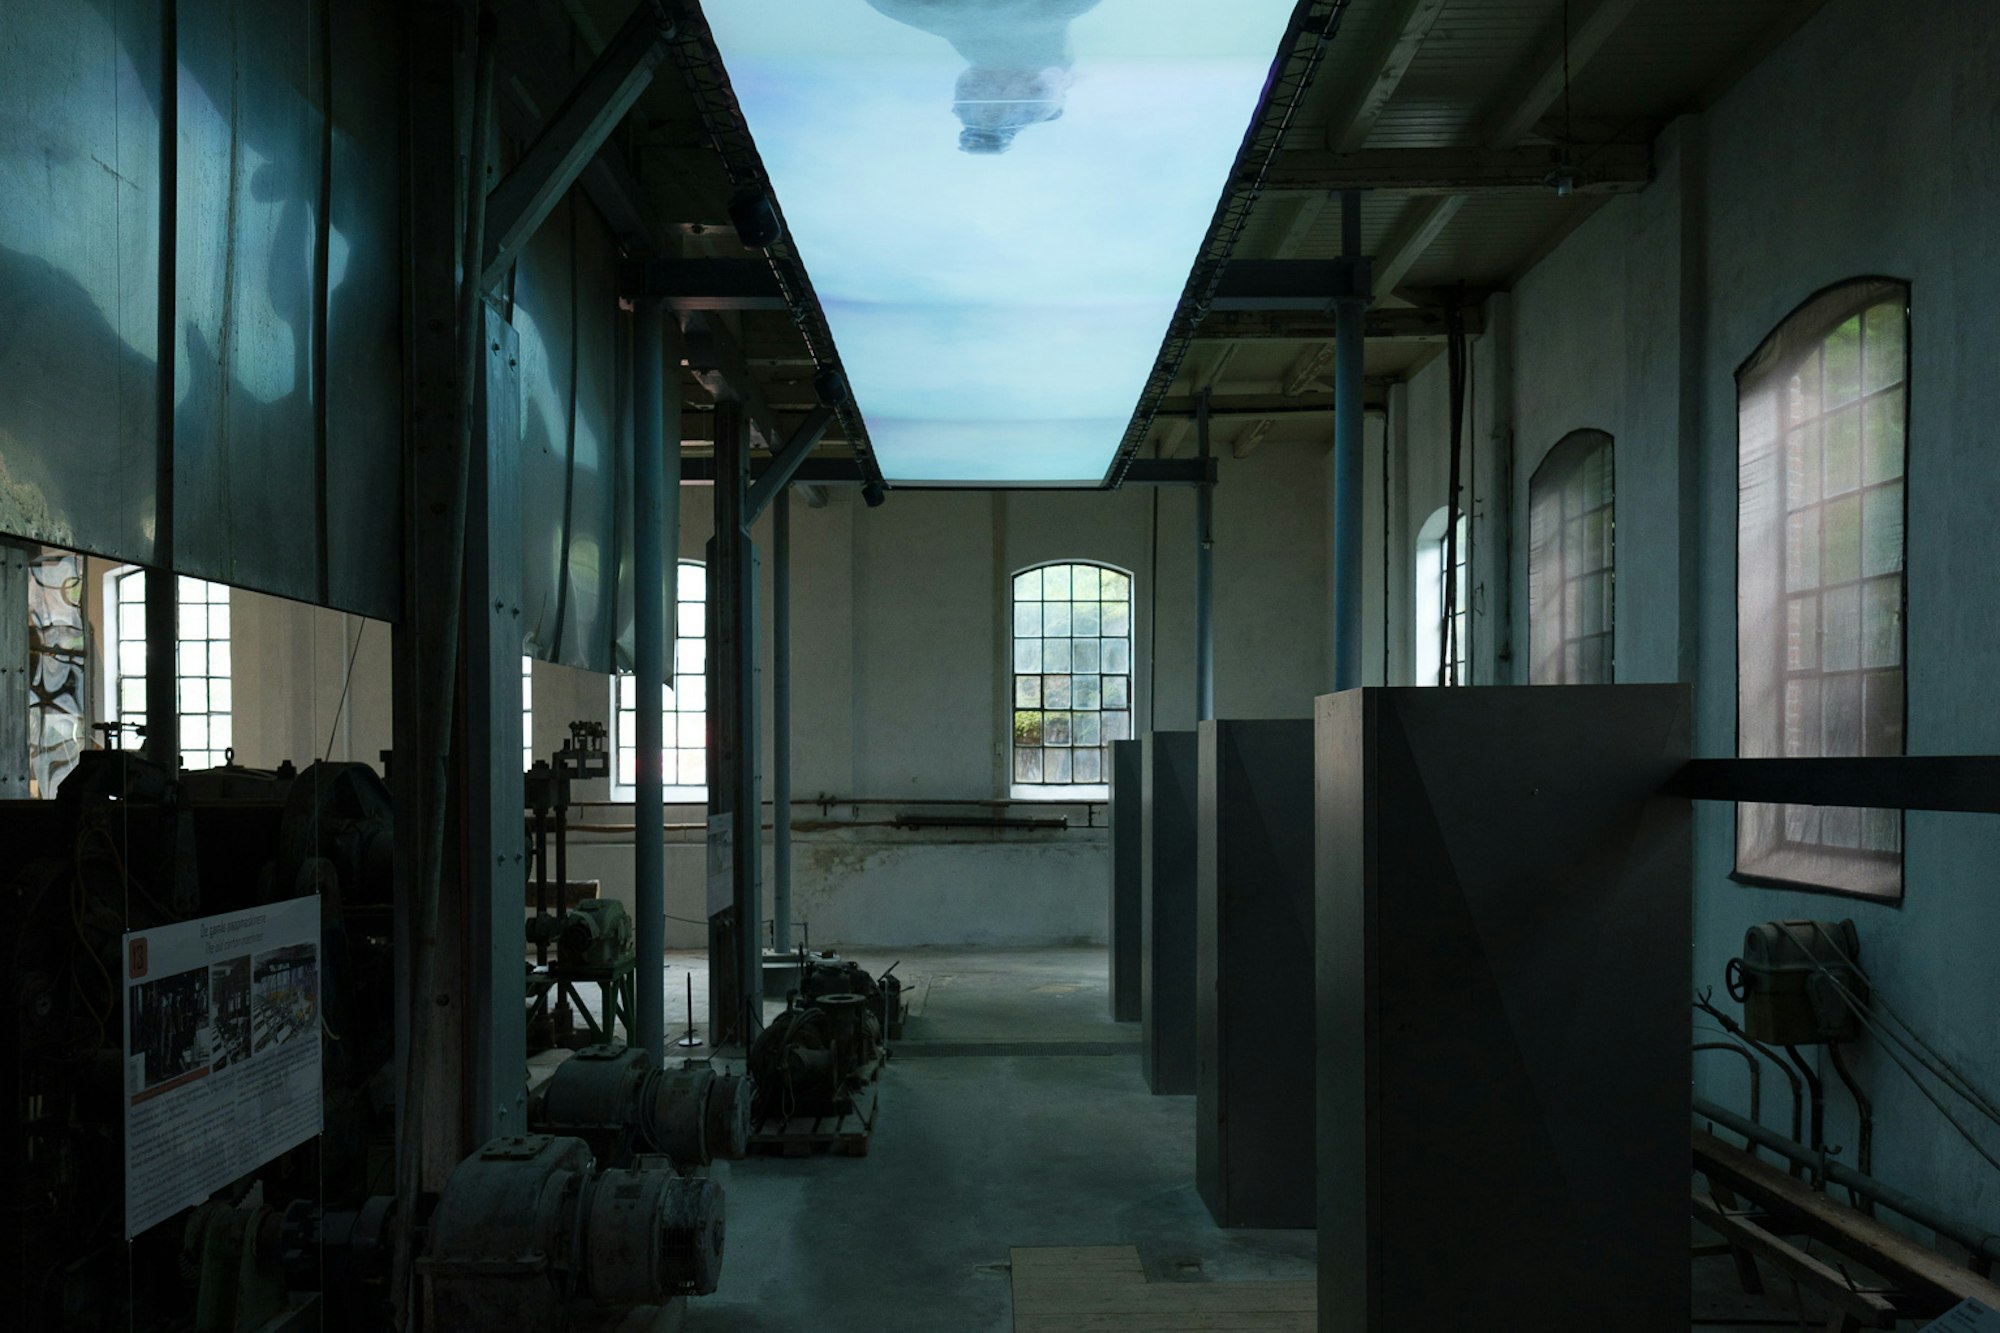 A video installation placed in the ceiling showing a horse running from underneath.